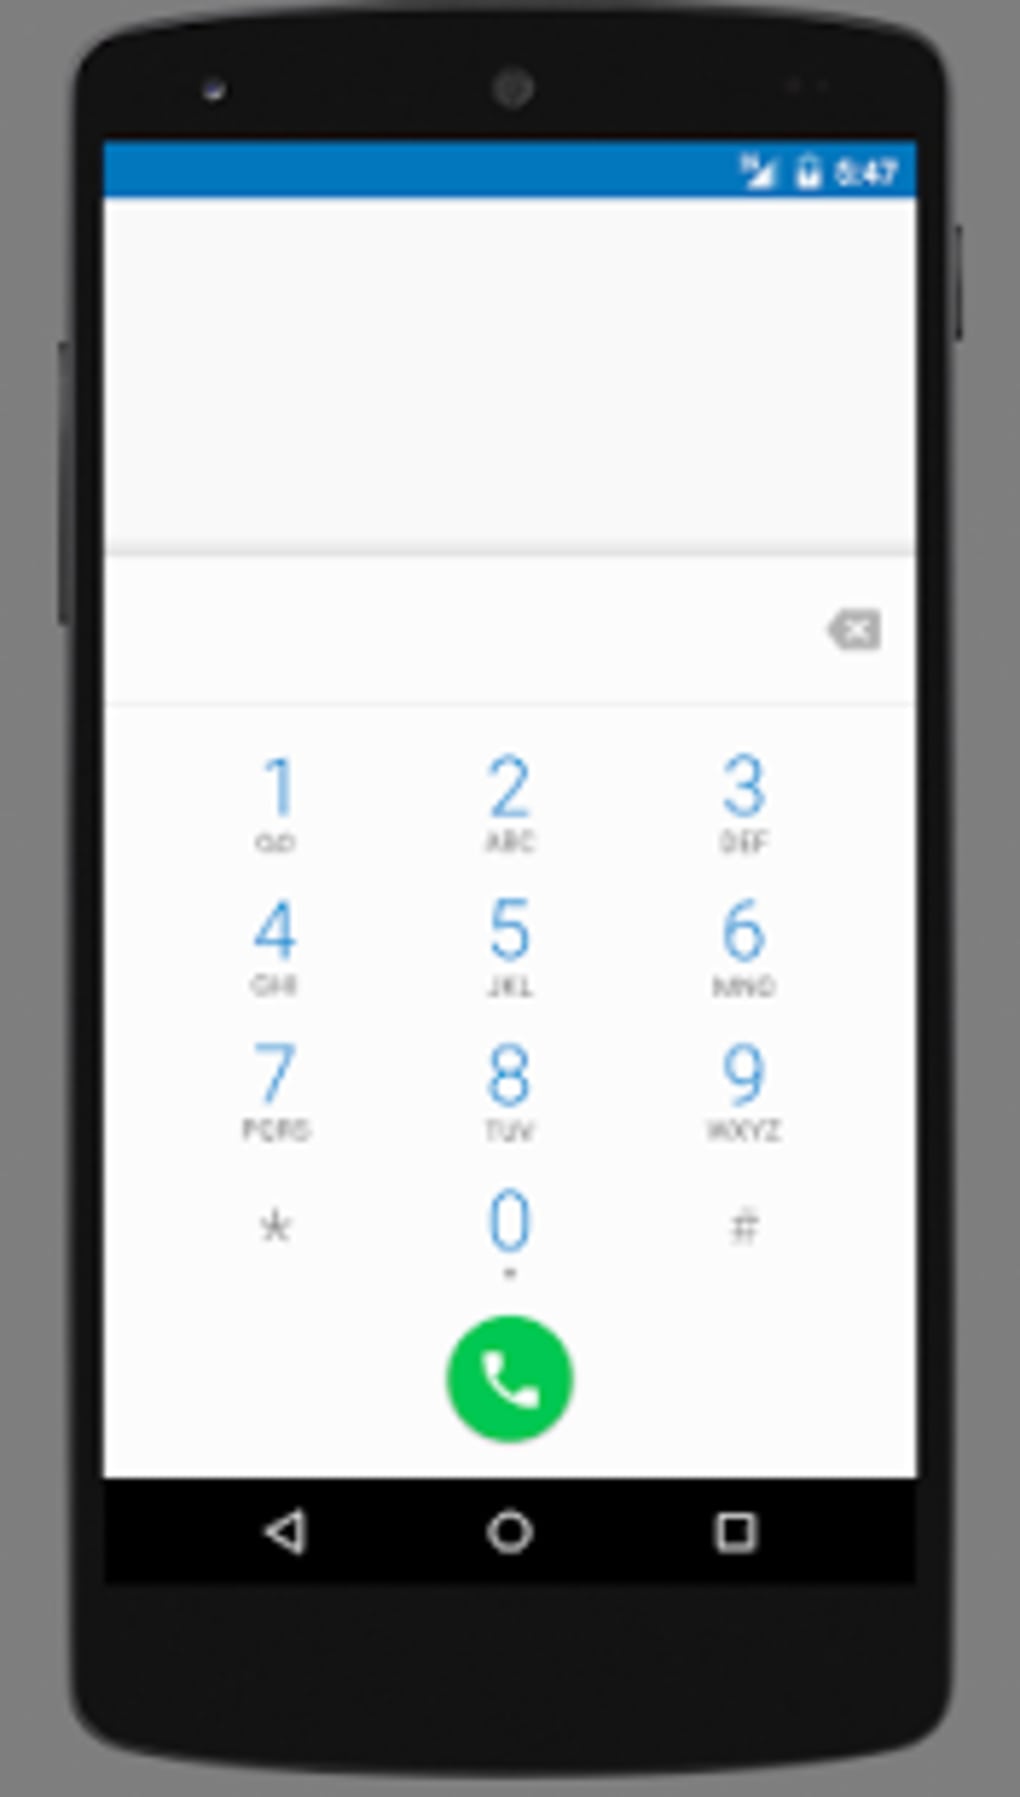 Download Dialpad on iOS, Android and More